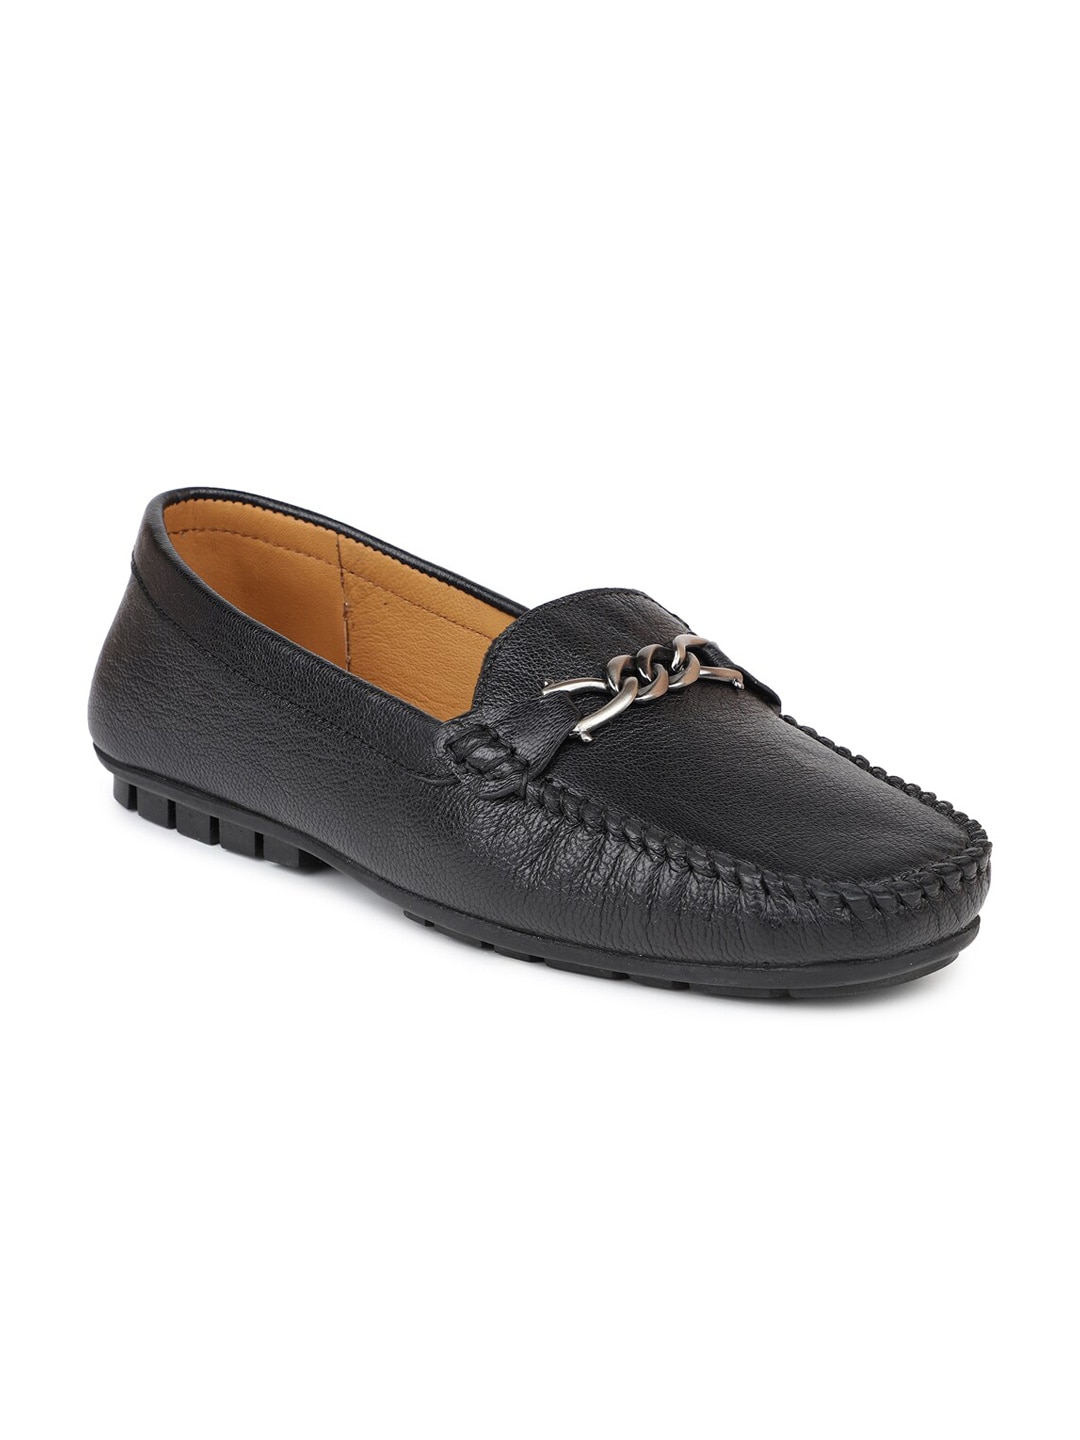 Inc 5 Women Black Textured Loafers Price in India